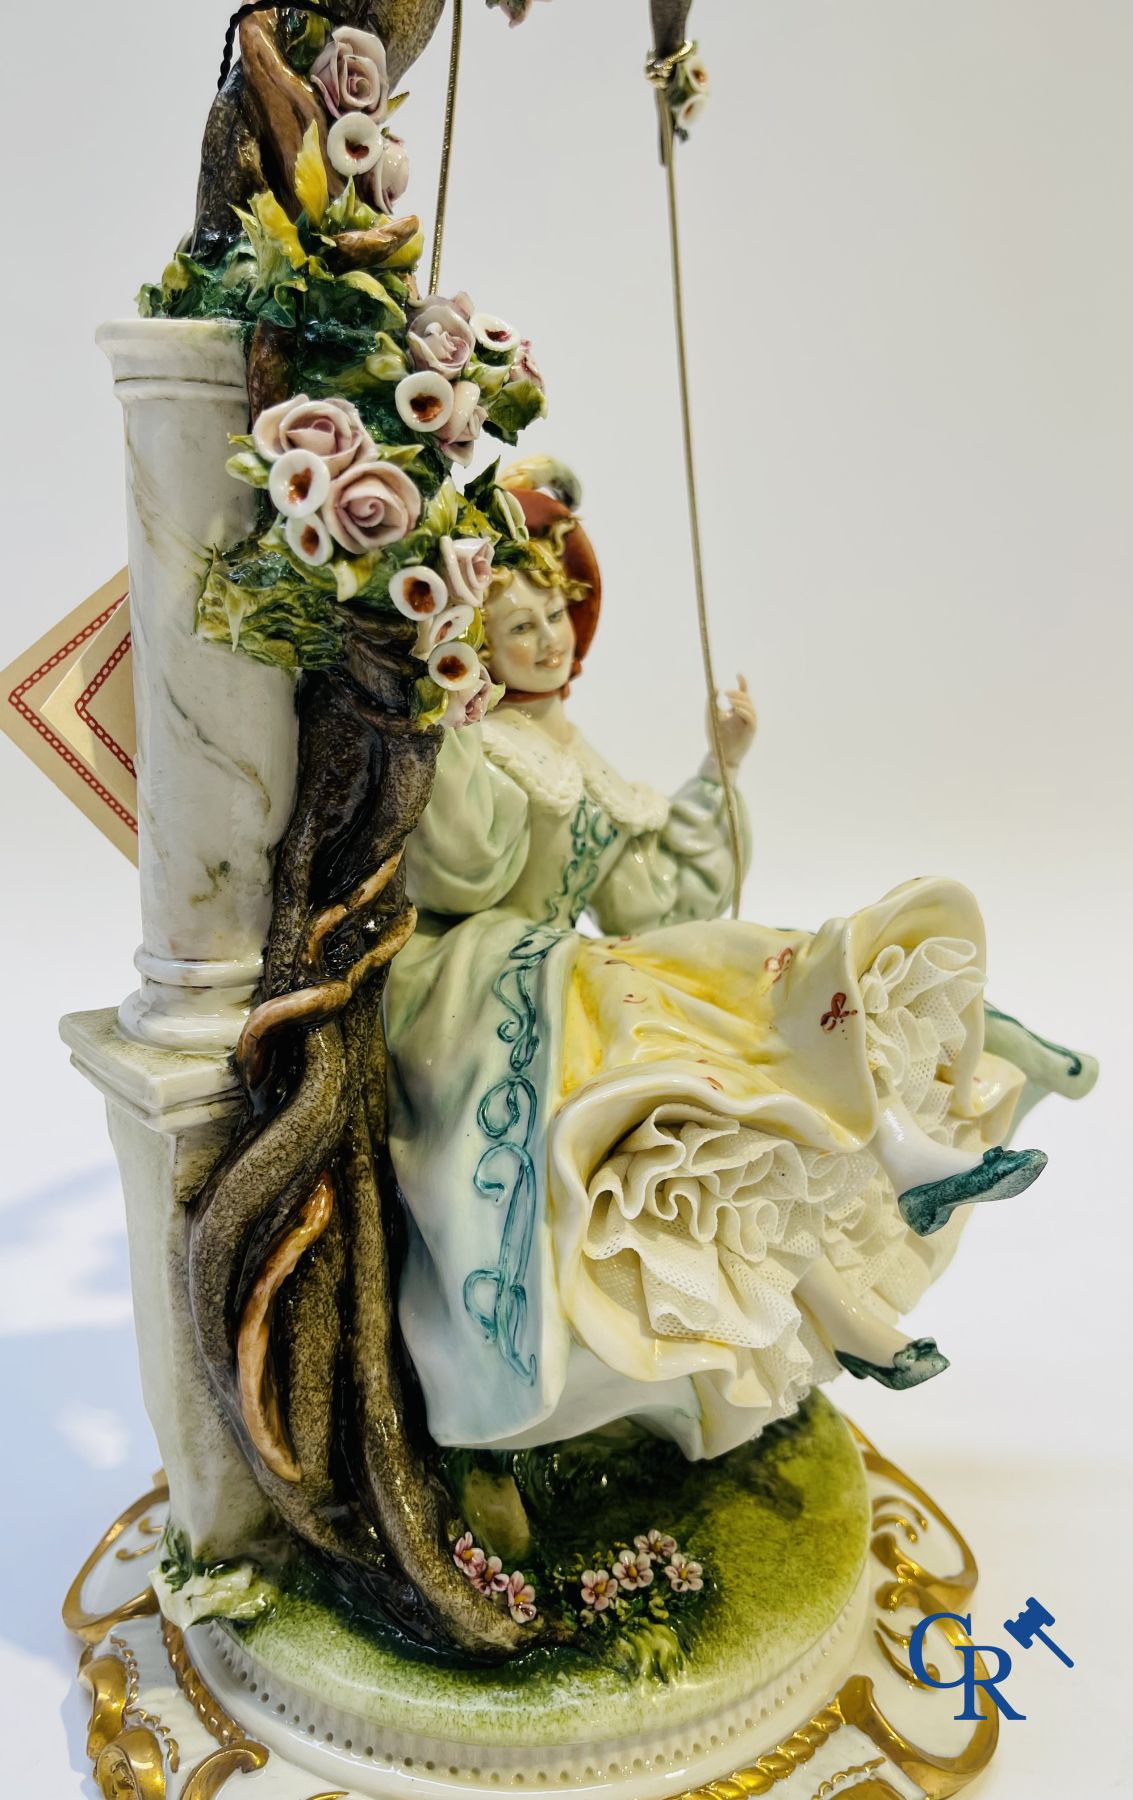 Porcelain: Capodimonte: 2 groups in Italian porcelain with lace. - Image 5 of 8